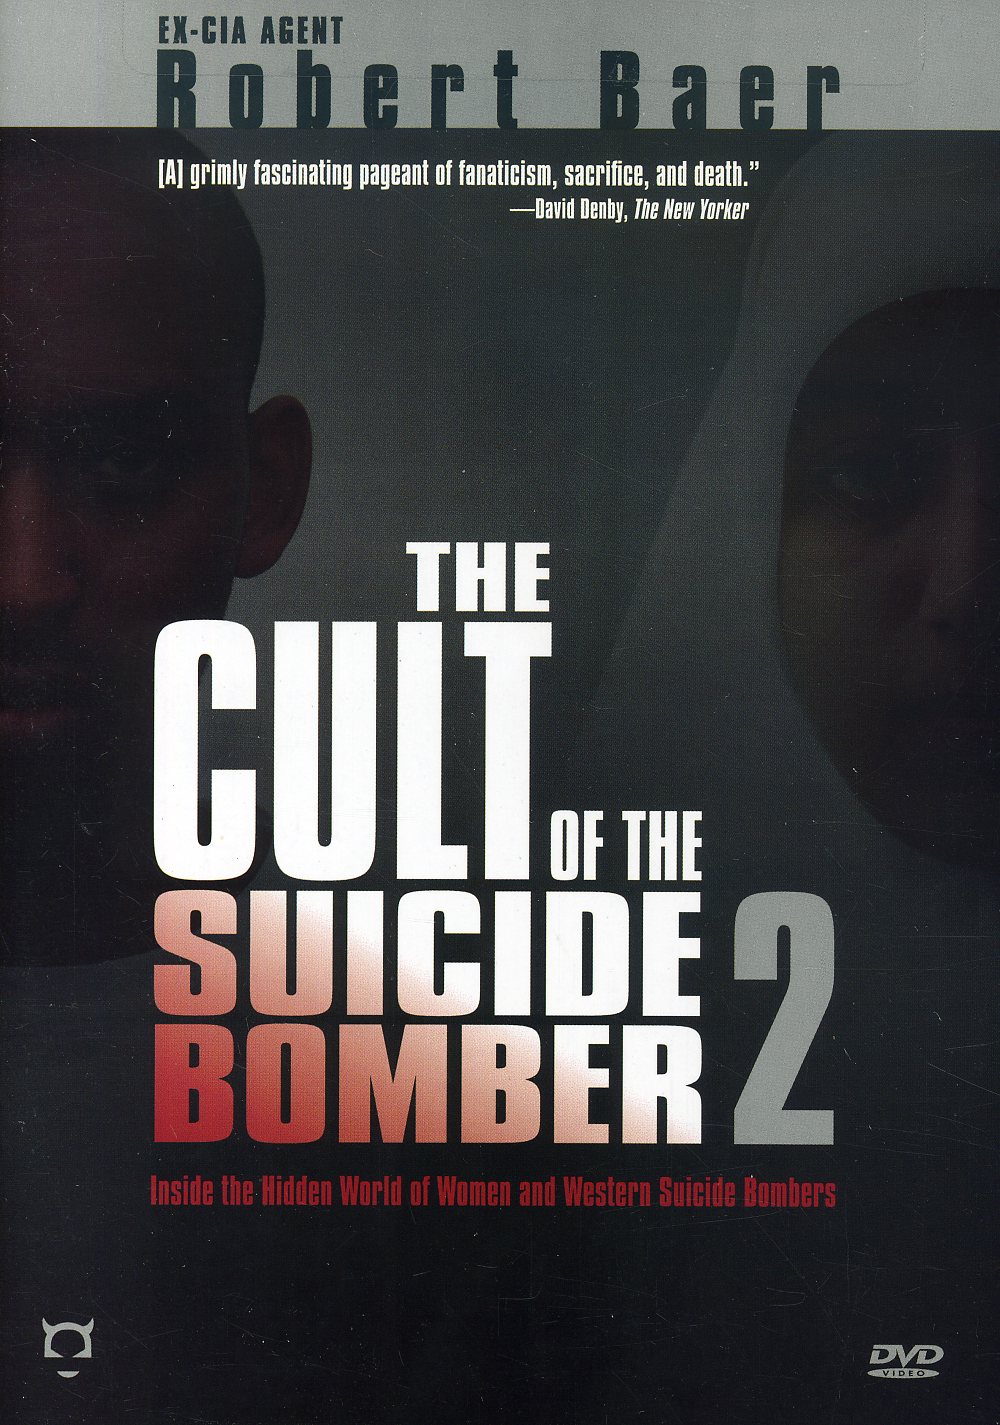 CULT OF THE SUICIDE BOMBER 2